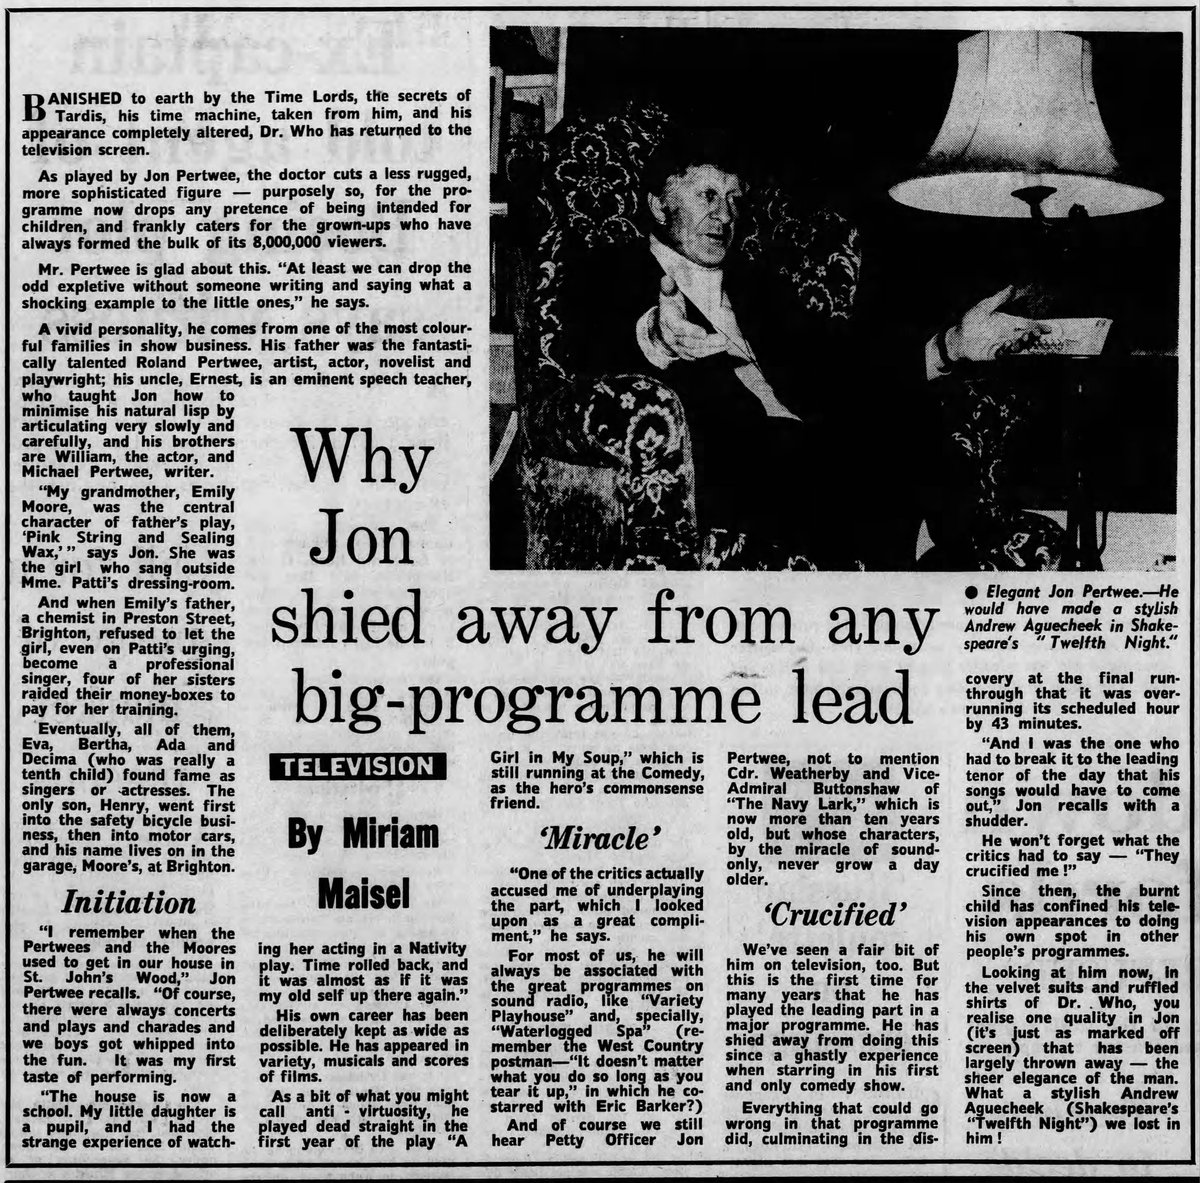 Jan 14, 1970 - The Guardian Journal - A wonderful piece on Jon Pertwee and why he was reluctant to take the lead of a major show.
#JonPertwee #DoctorWho #TheGuardianJournal #TVhistory #actorinterview